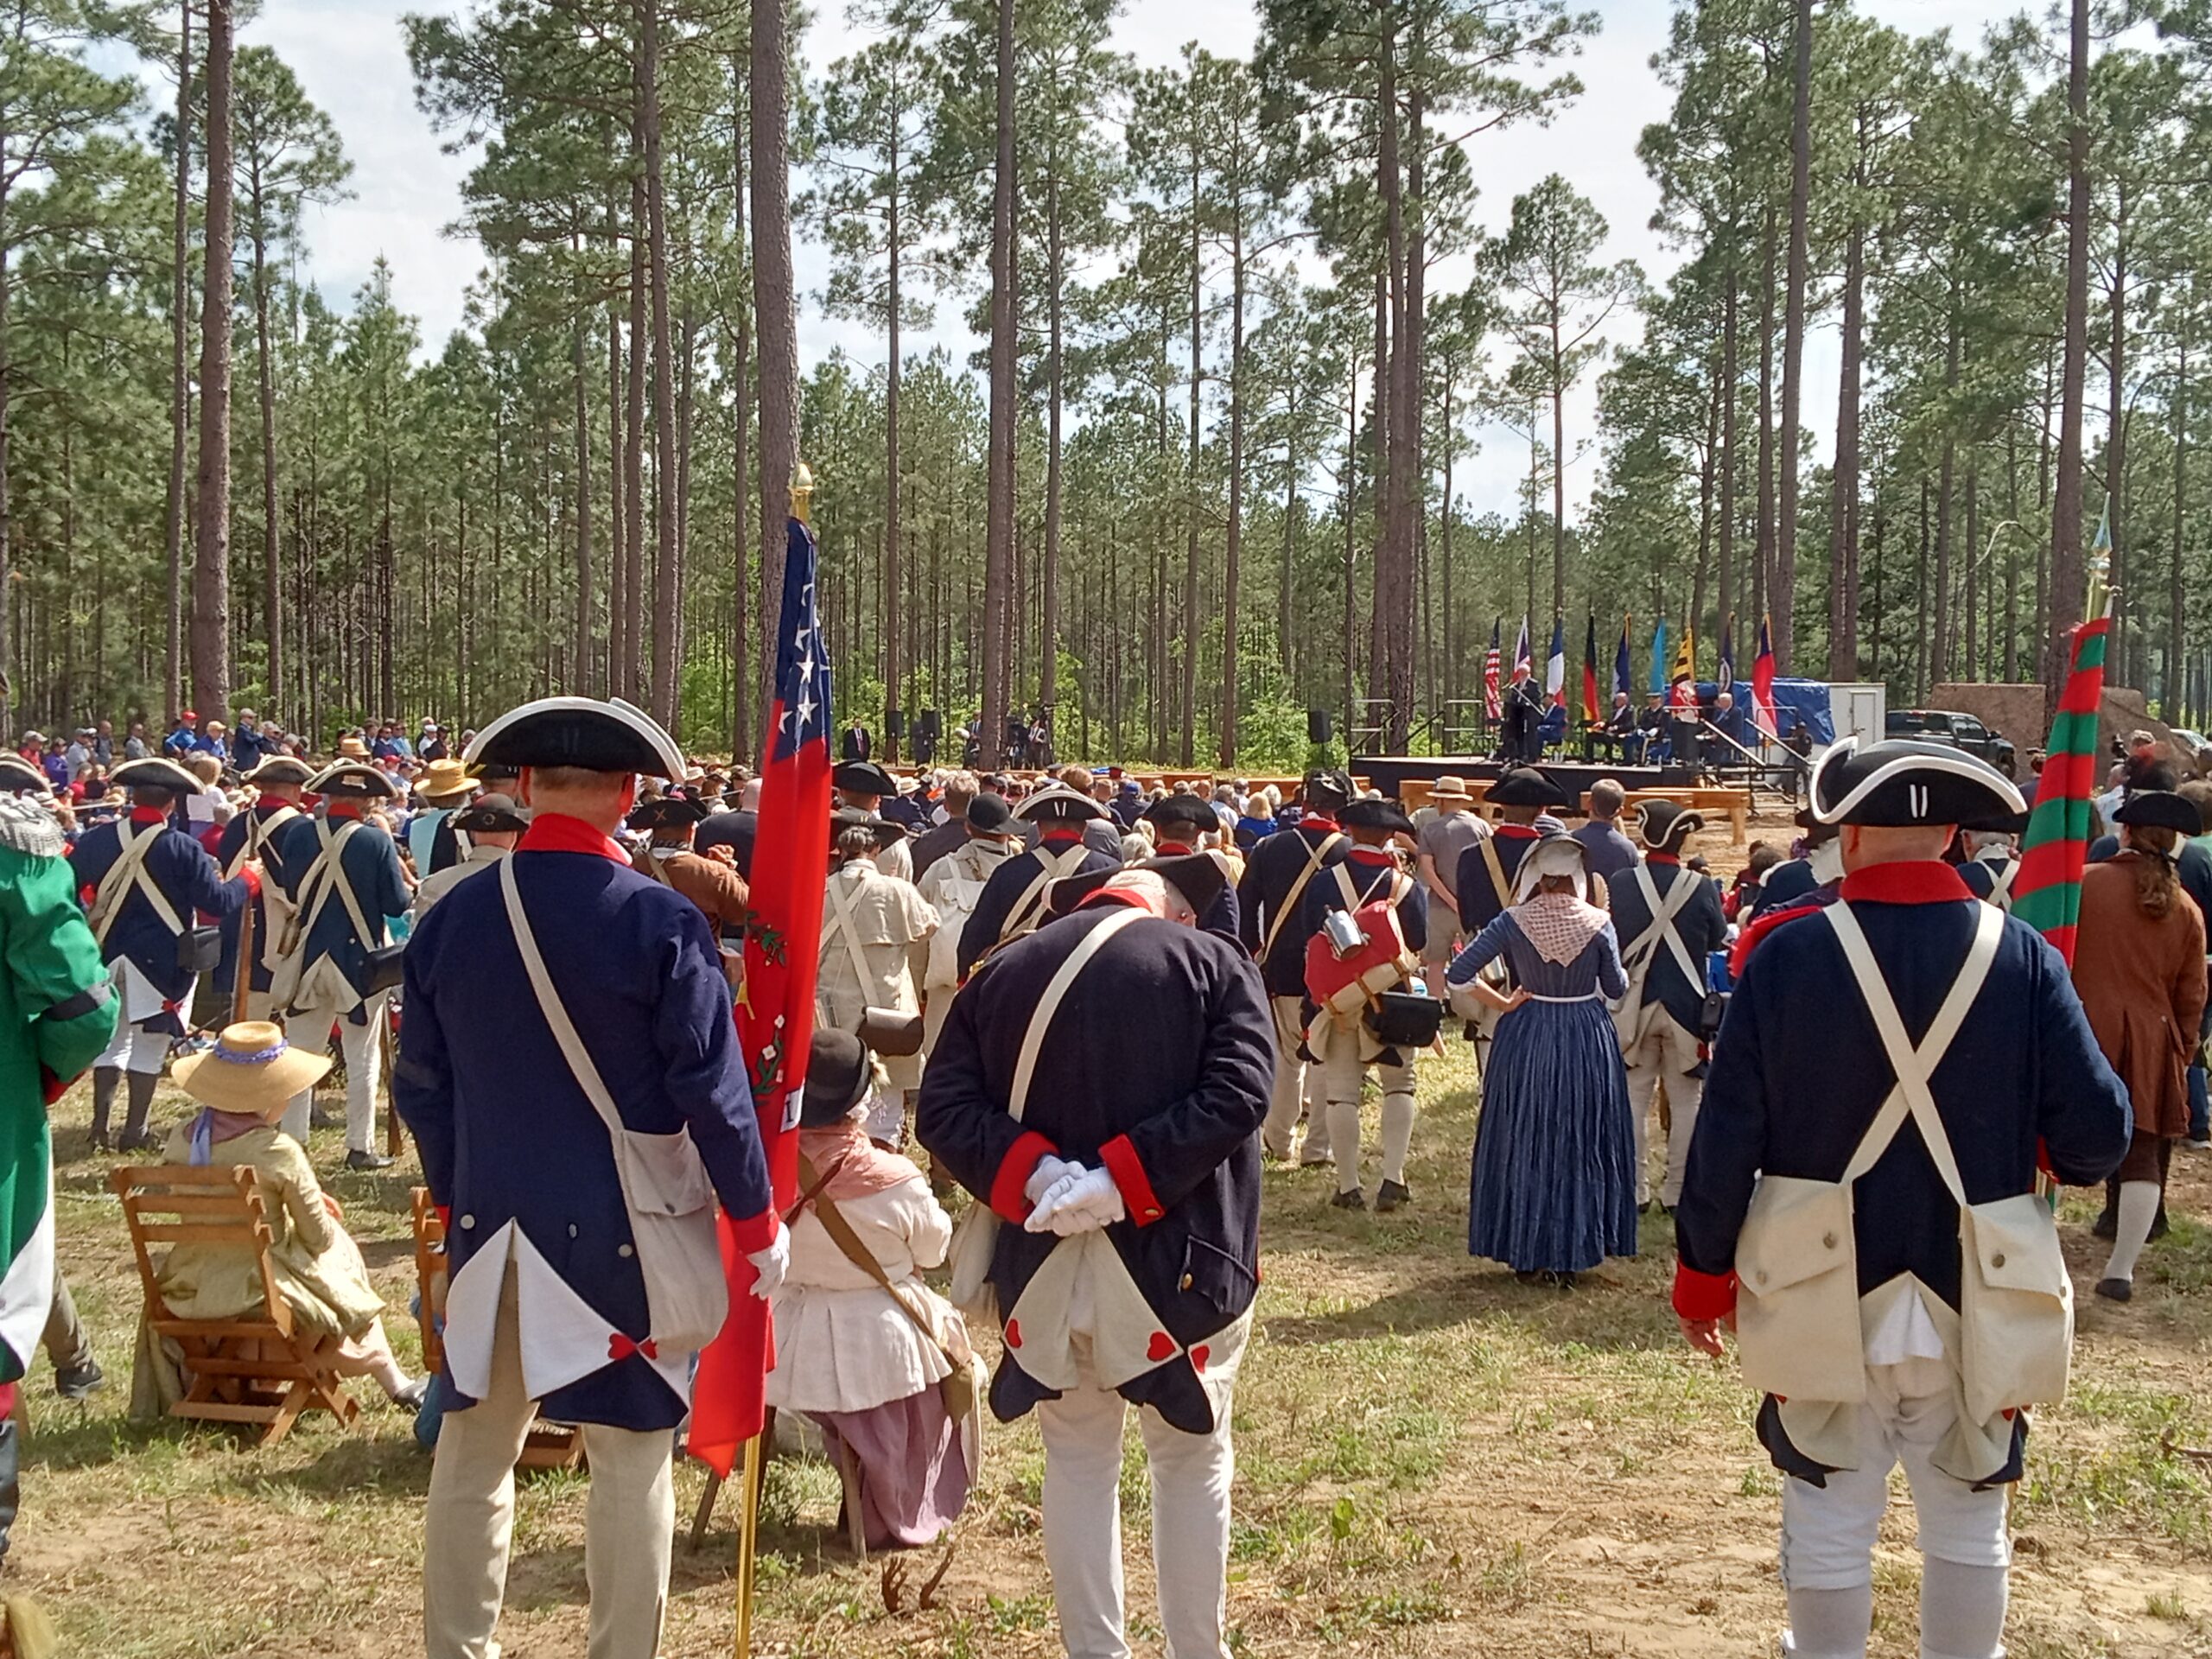 12 Patriot soldiers, all young boys, finally receive proper burial 243 years after the Revolutionary Battle of Camden.